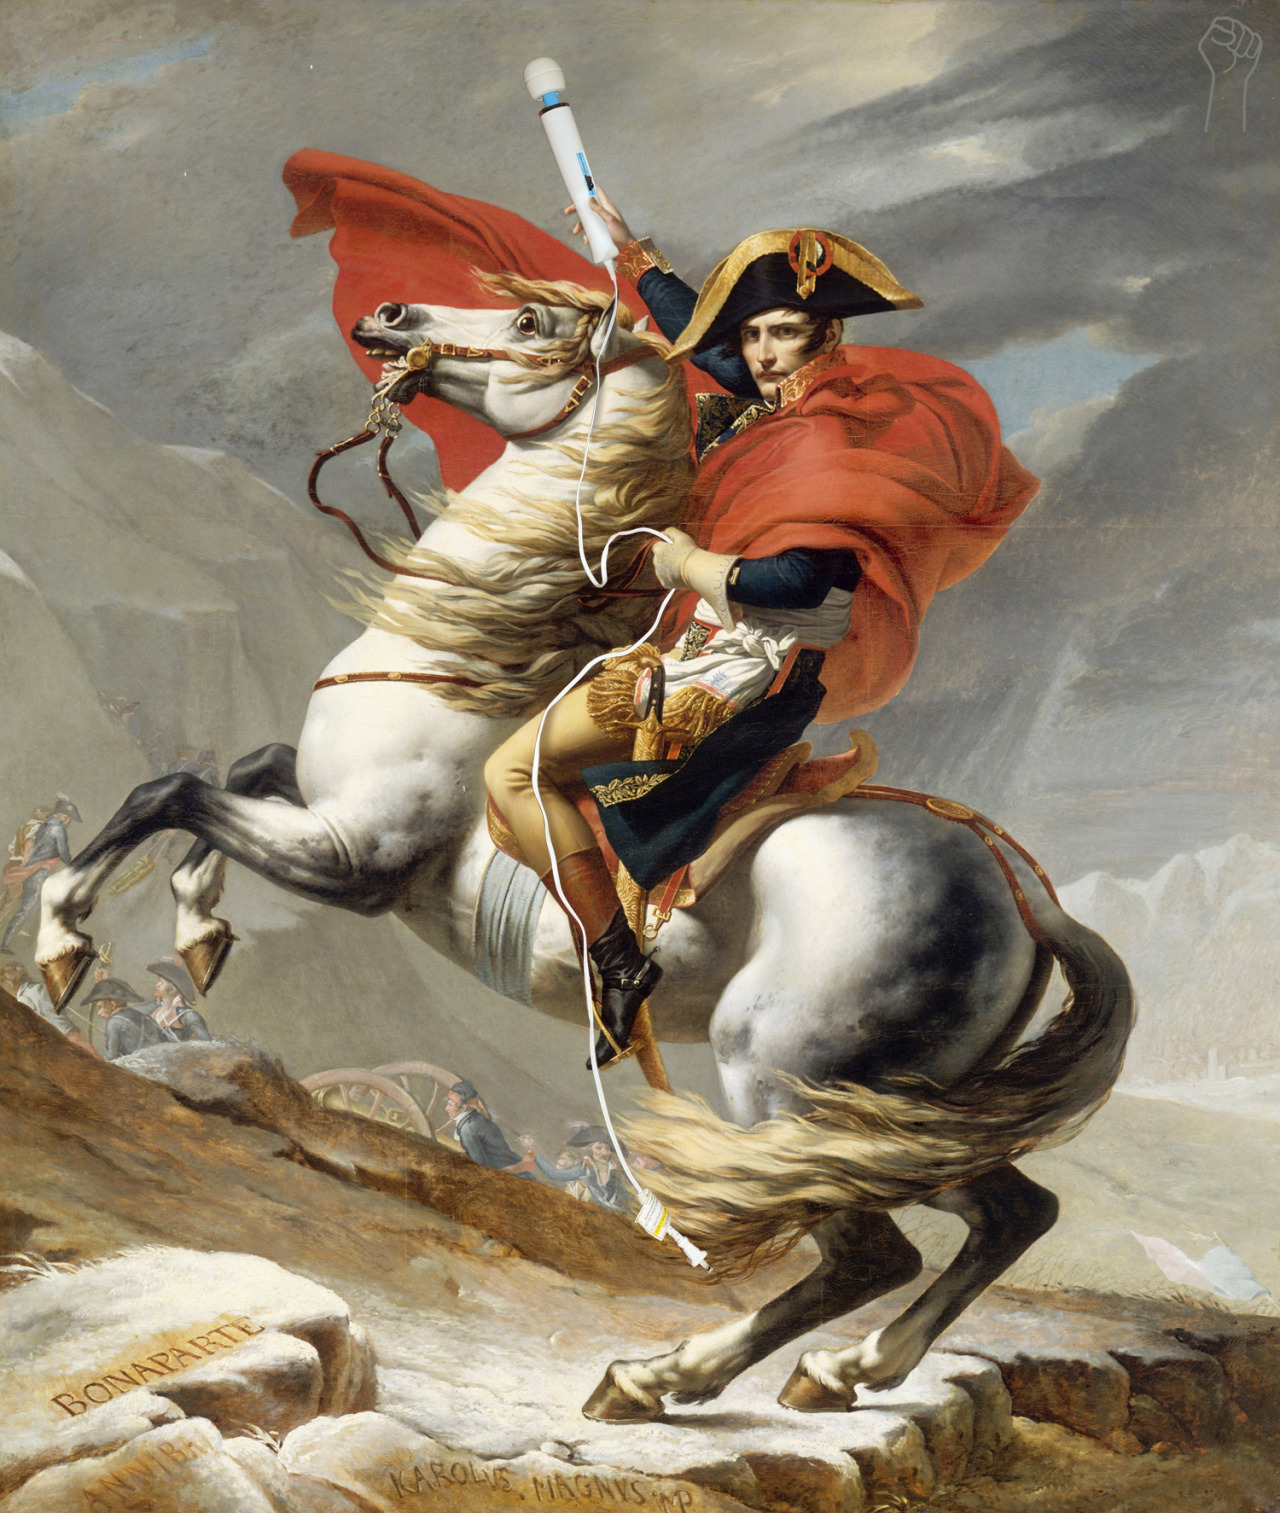 Napoleon Crossing the Alps with Magic Wand by Jacques-Louis David.